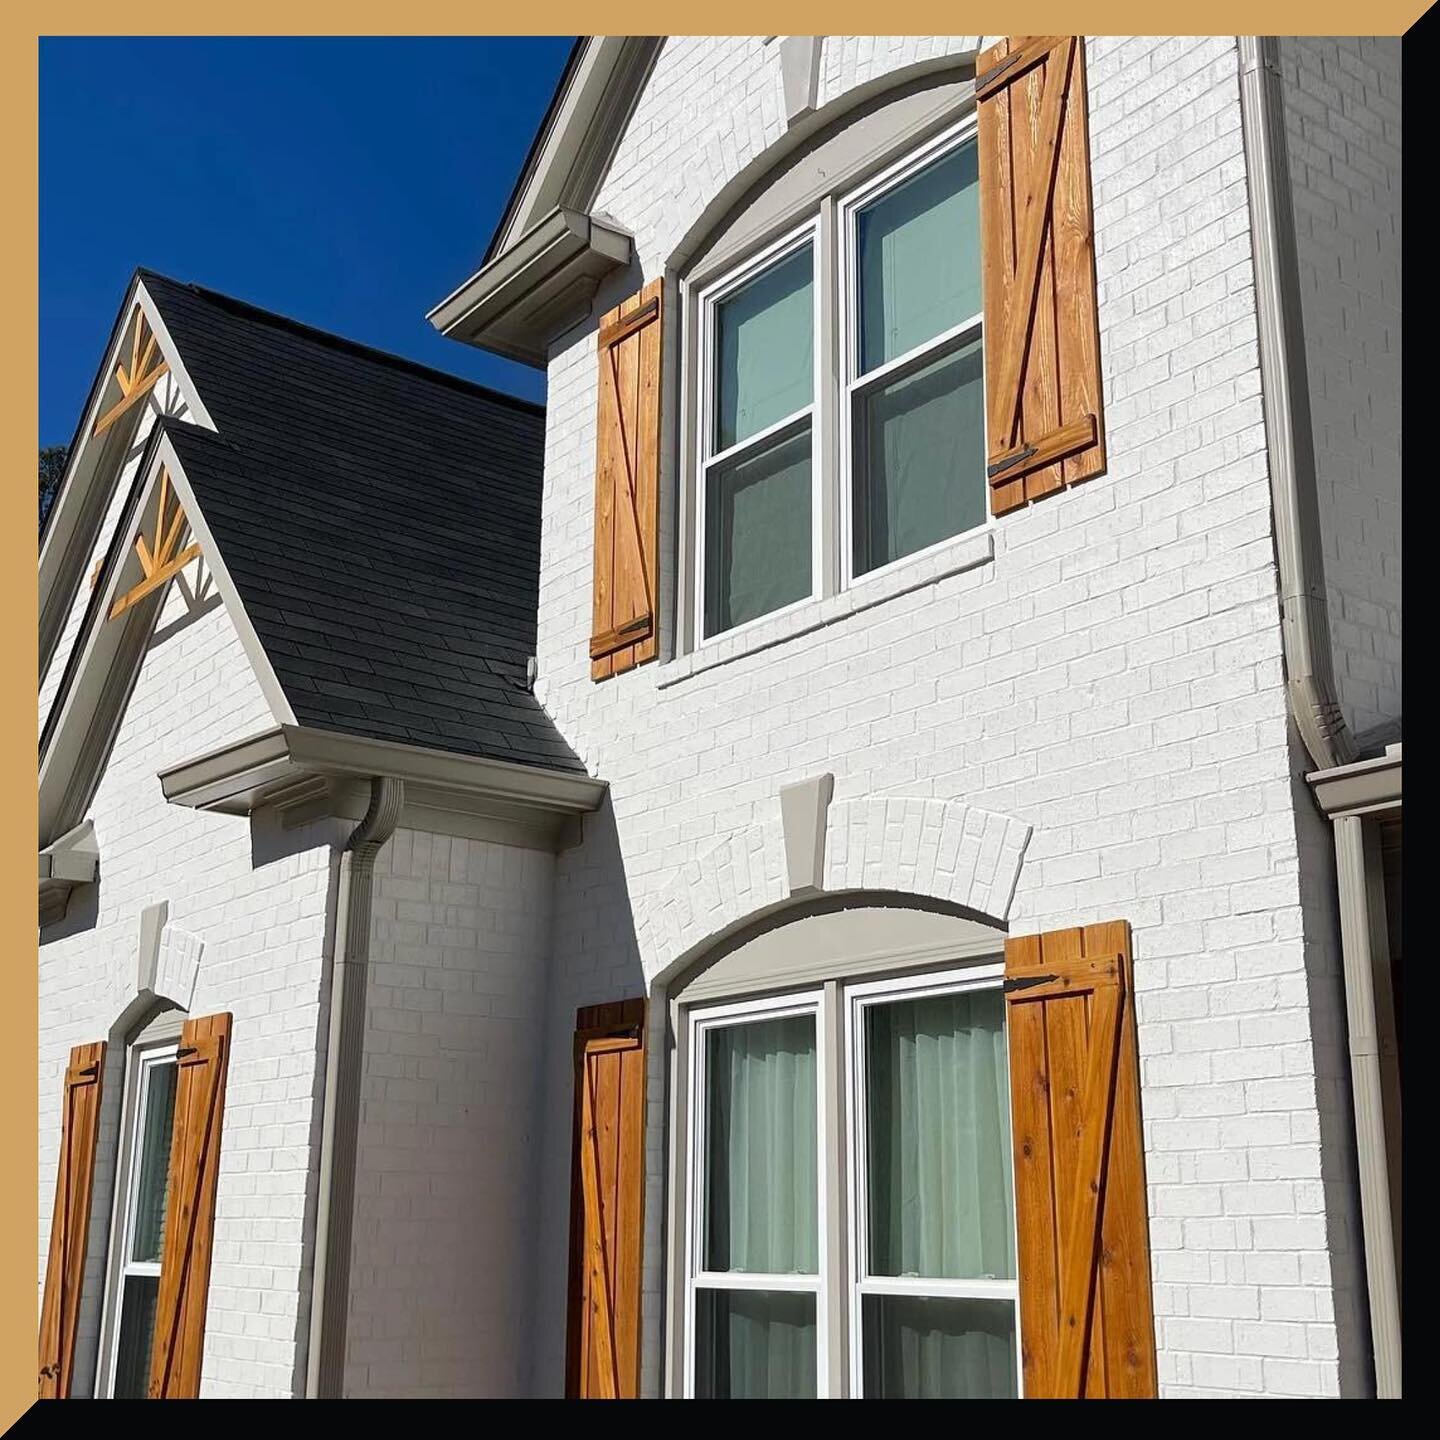 &bull; &bull; Book your exterior makeover with the residential painting veterans. 🔥

[McHugh Painting &bull; Since 2008]
The Peace Of Mind You Deserve.

7-Year Warranty on Interior and Exterior
Lifetime Warranty on Cabinets
100+ 5-Star Reviews!

👉 